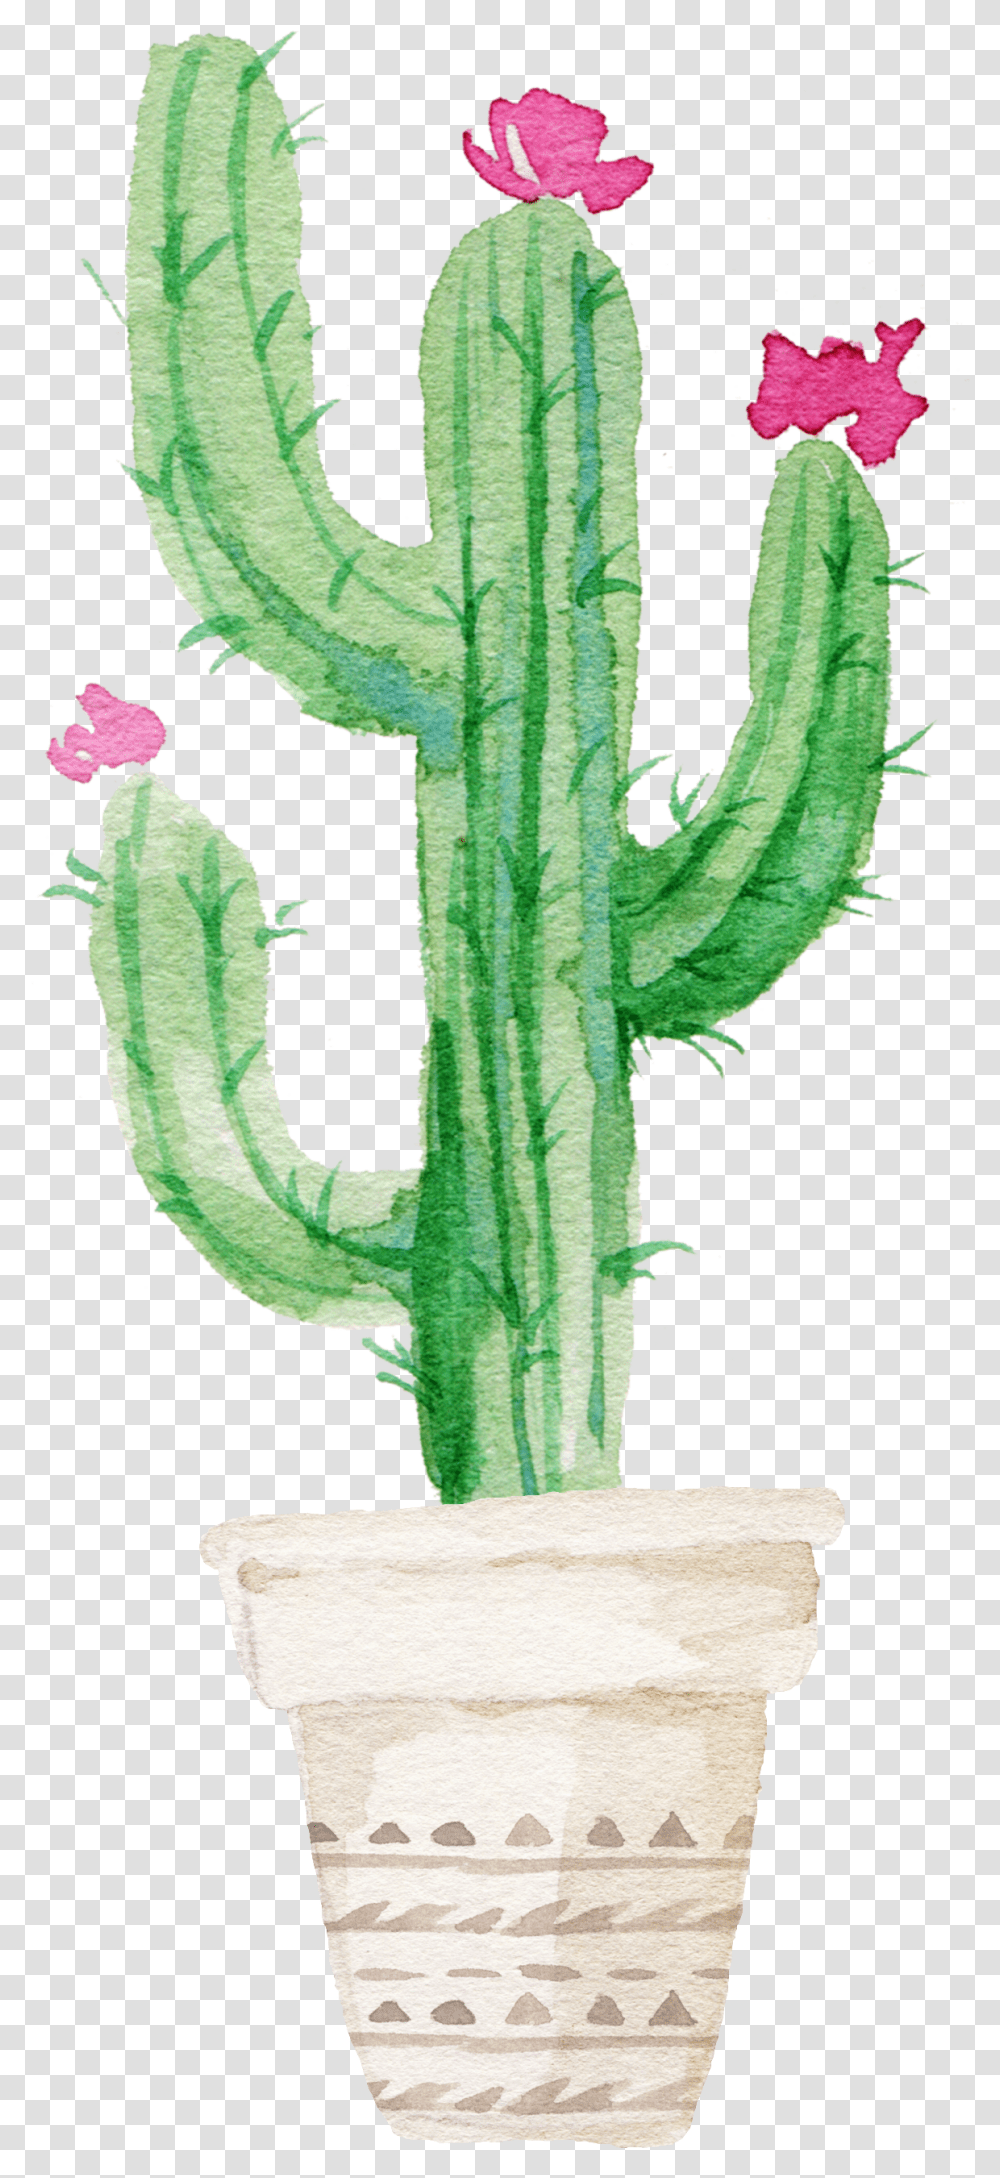 Download Succulent Plant Watercolor Painting Watercolor Cactus With Flower Drawing Transparent Png